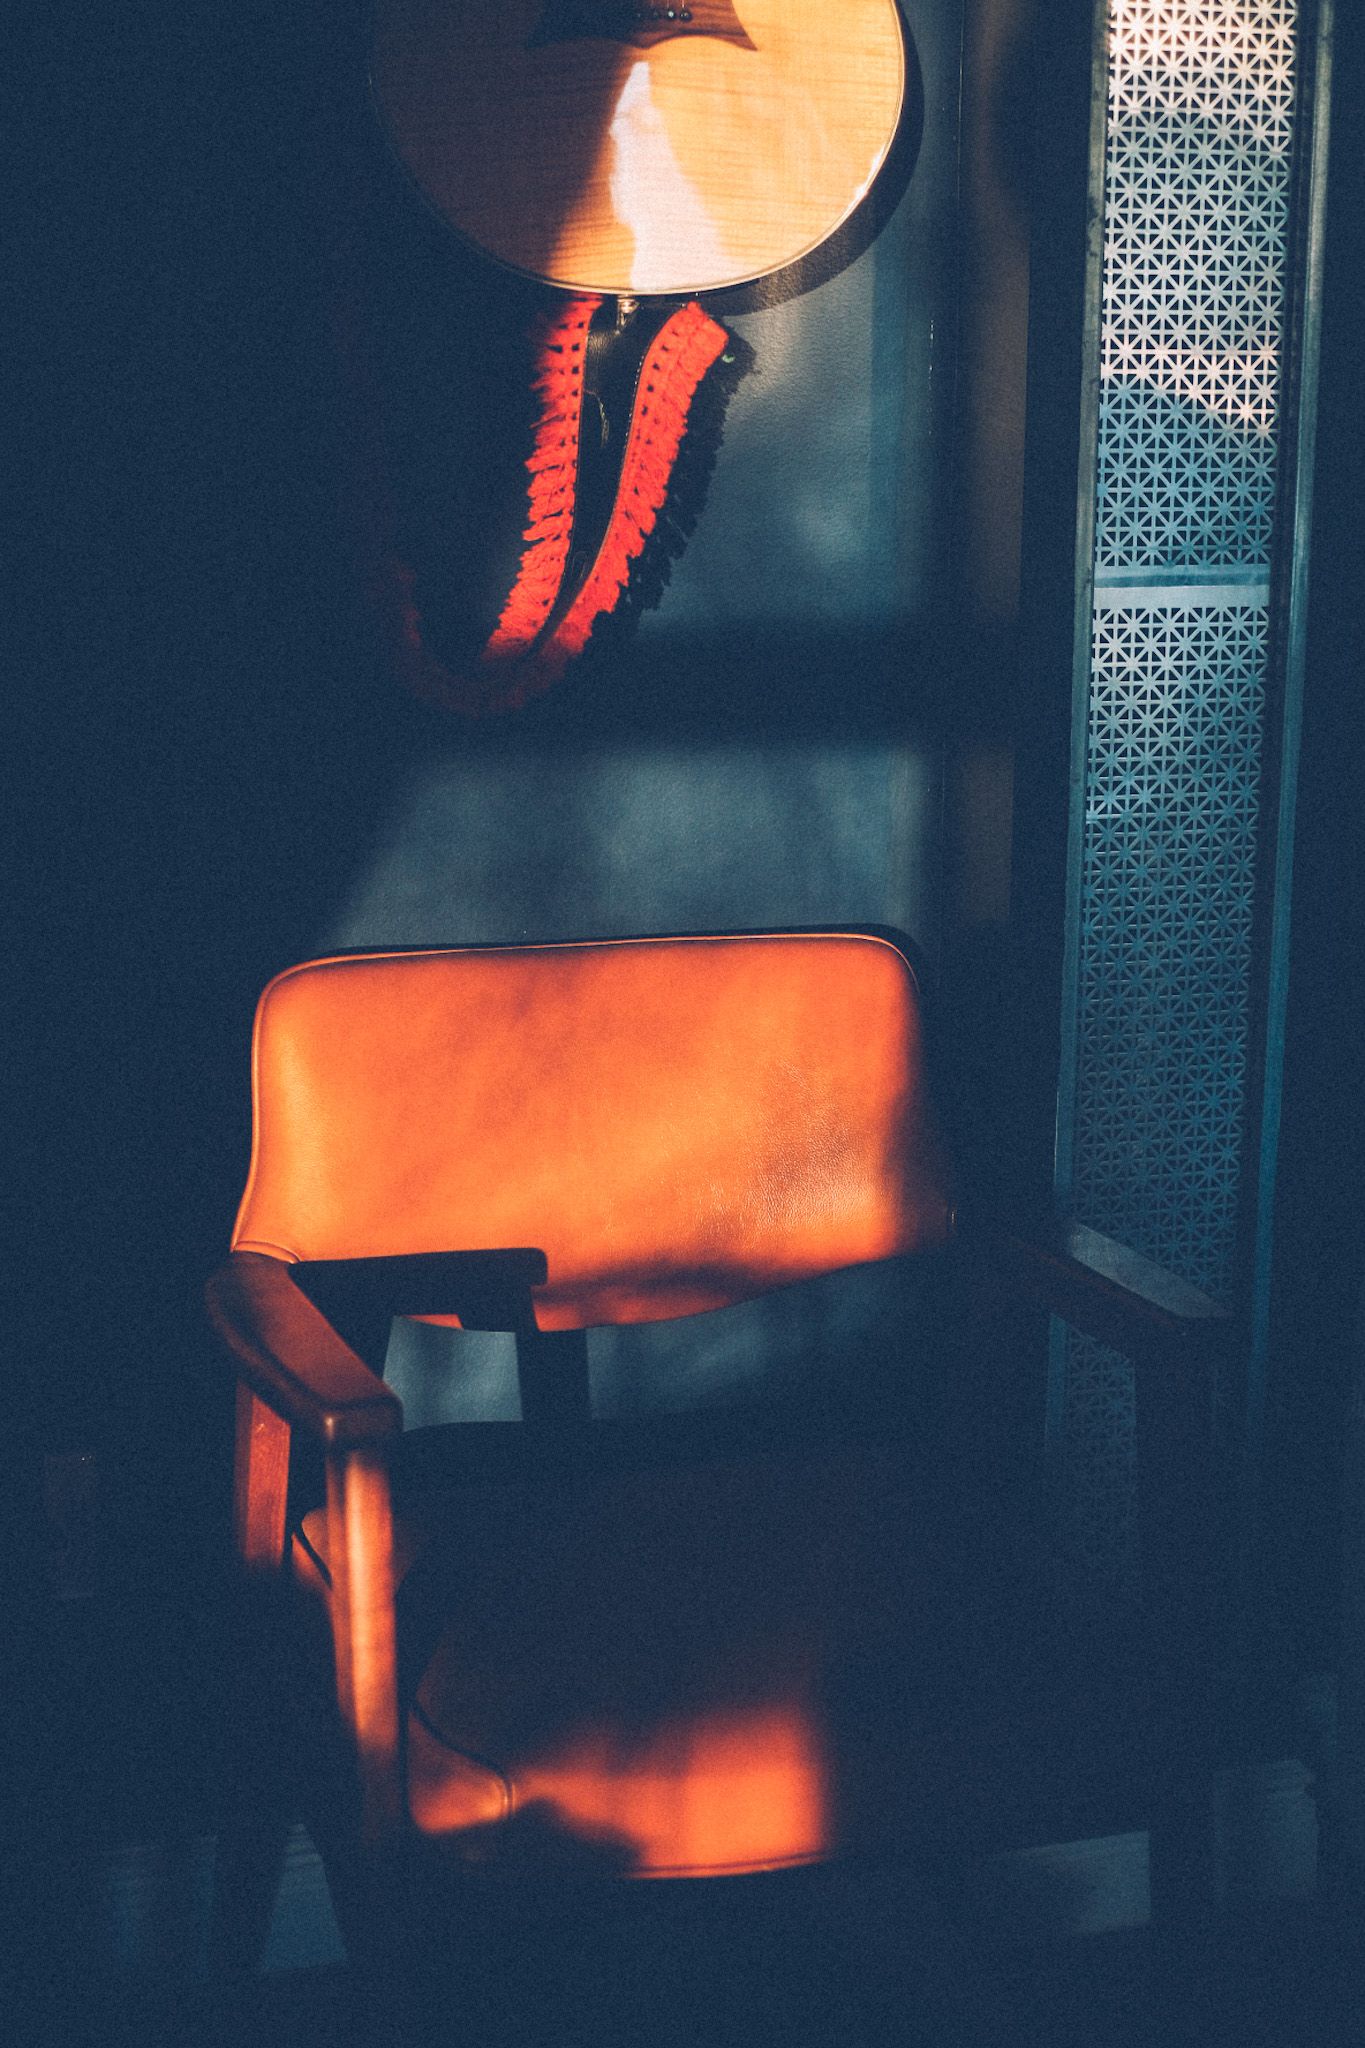 Stripes of afternoon light illuminate the bottom half of a guitar hanging on a wall above an orange leather chair.